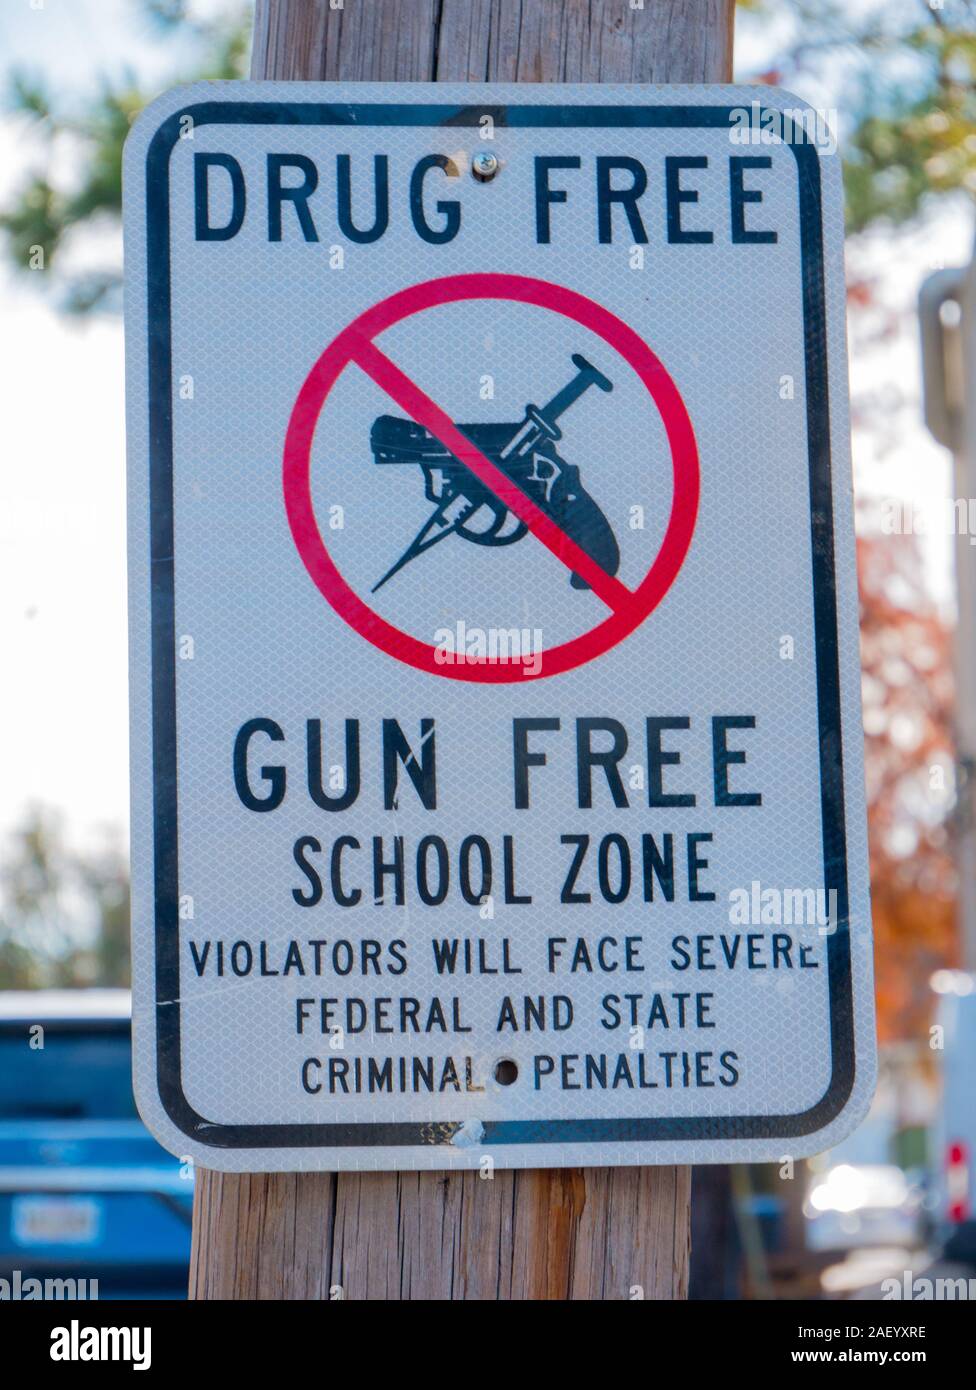 Drug Free and Gun Free School Zone sign in New Orleans, Louisiana, USA. Stock Photo